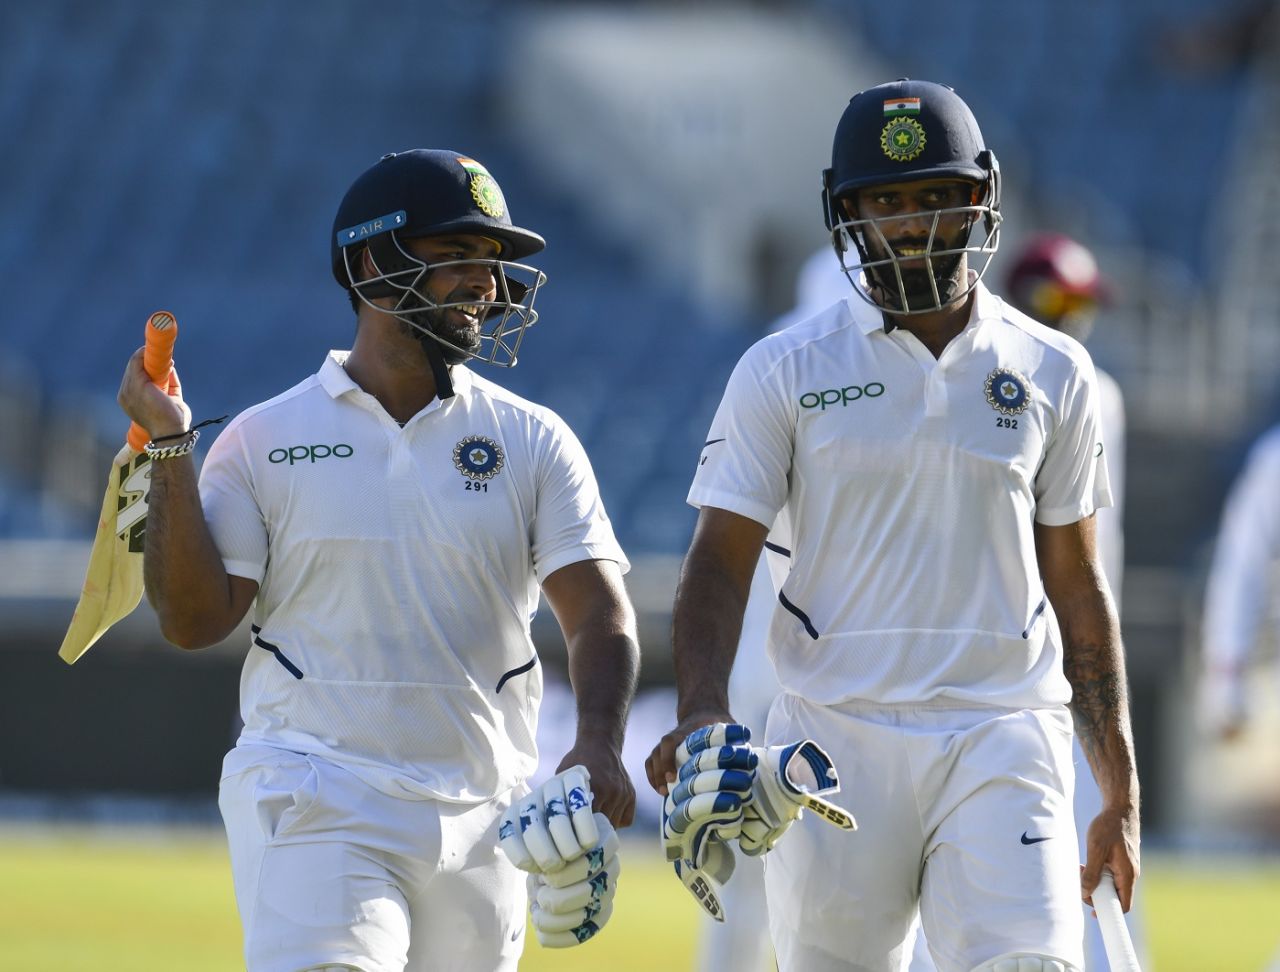 Rishabh Pant and Hanuma Vihari walk back in after the first day's play, West Indies v India, 2nd Test, Kingston, 1st day, August 30, 2019